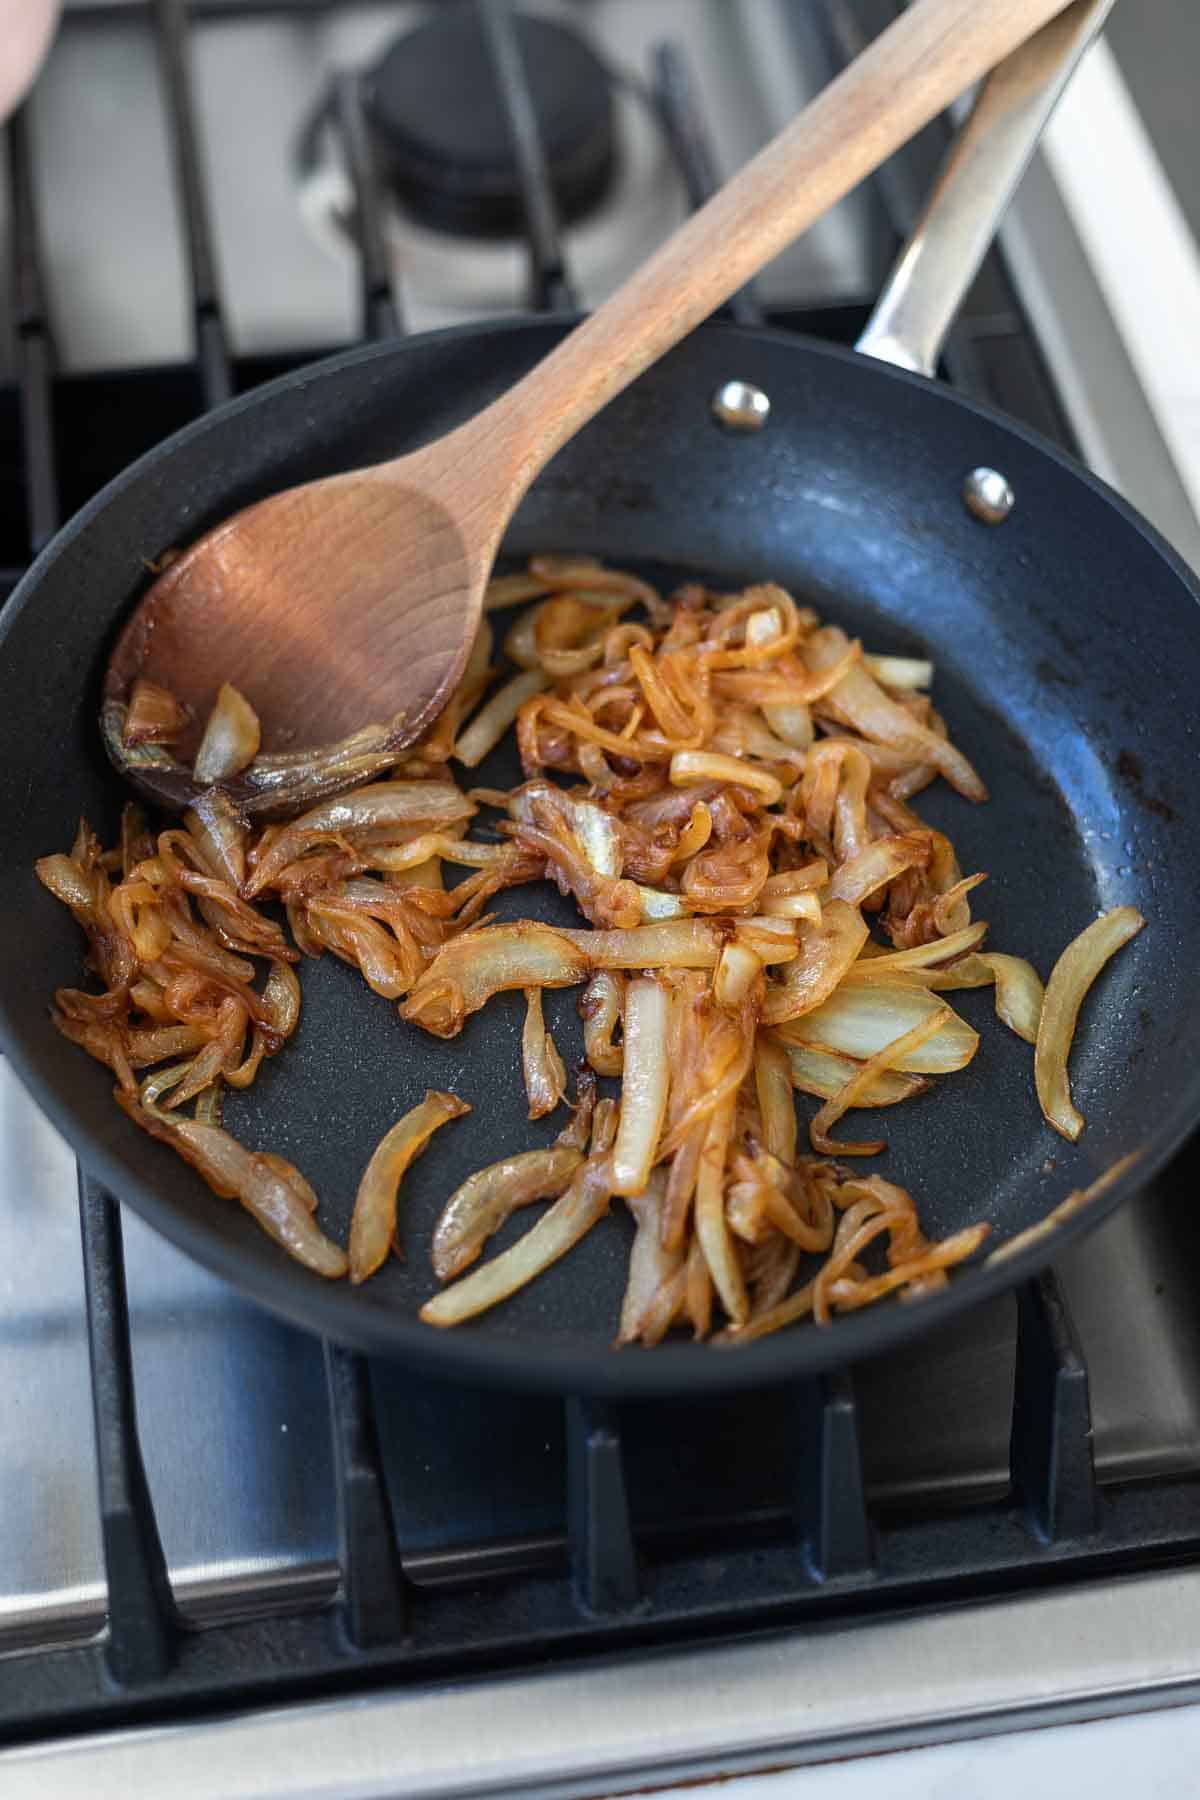 Sliced caramelized onions in a black pan on the stove with a wooden spoon.